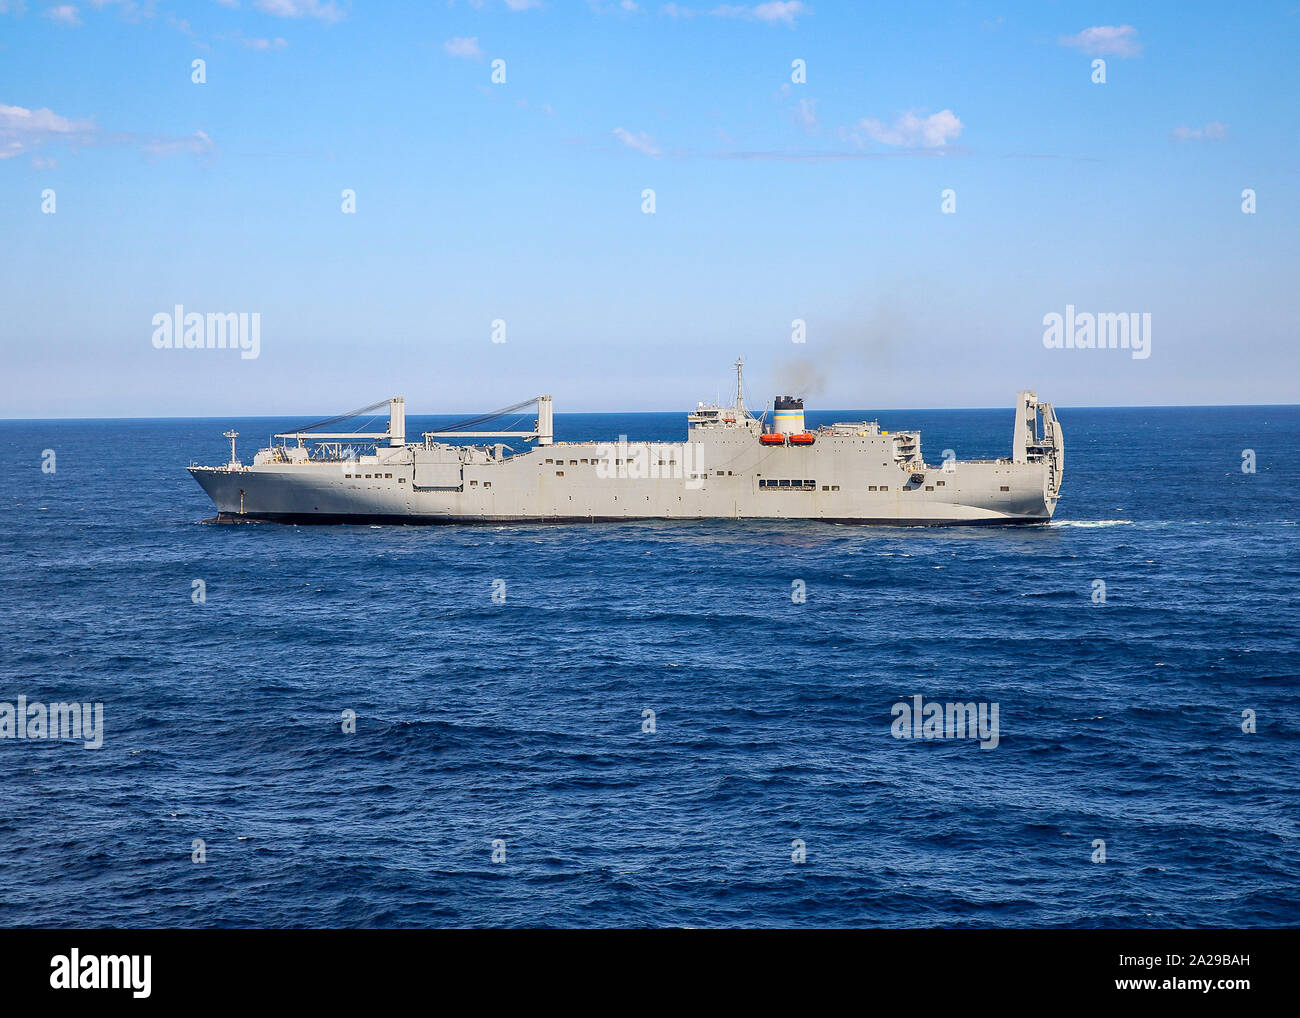 190924-N-BI924-9813  CHESAPEAKE BAY (Sept. 24, 2019) Military Sealift Command large, medium-speed roll-on/roll-off vessel USNS Gilliland (T-AKR 298), participates in a group sail during Turbo Activation. Turbo Activation is a large-scale sealift readiness exercise series, which rapidly activates a mix of Military Sealift Command and U.S. Department of Transportation’s Maritime Administration ships on the East, West, and Gulf Coasts. The exercise provides an assessment of the readiness of U.S. sealift forces, while also stressing the underlying support network involved in maintaining, manning a Stock Photo